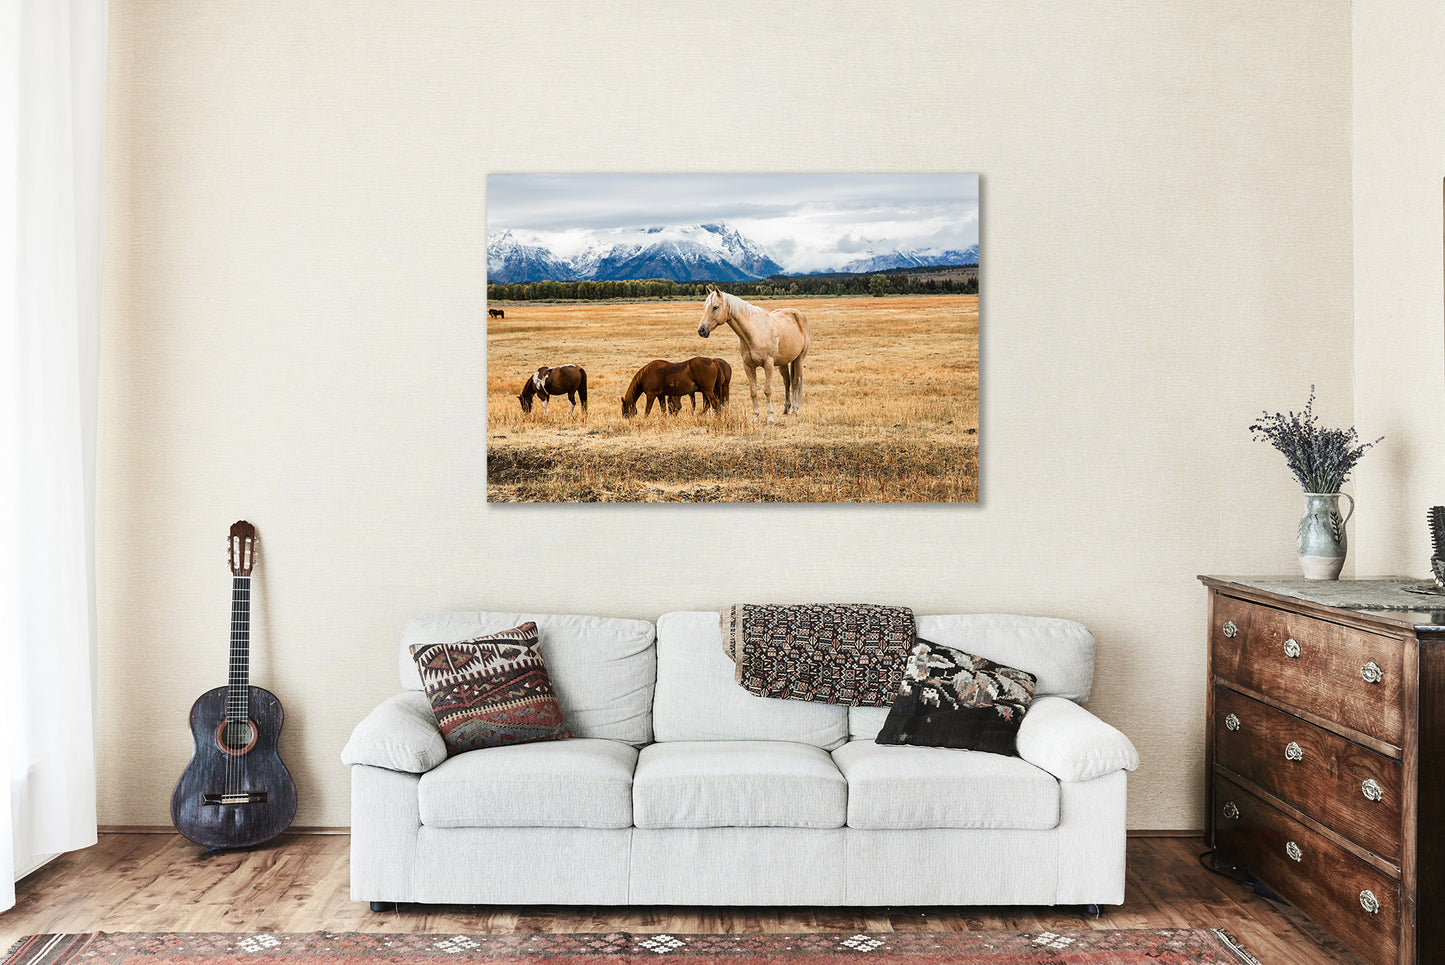 Equine Metal Print (Ready to Hang) Photo on Aluminum of Palomino Horse on Autumn Day in Grand Teton National Park Wyoming Rocky Mountain Wall Art Western Decor